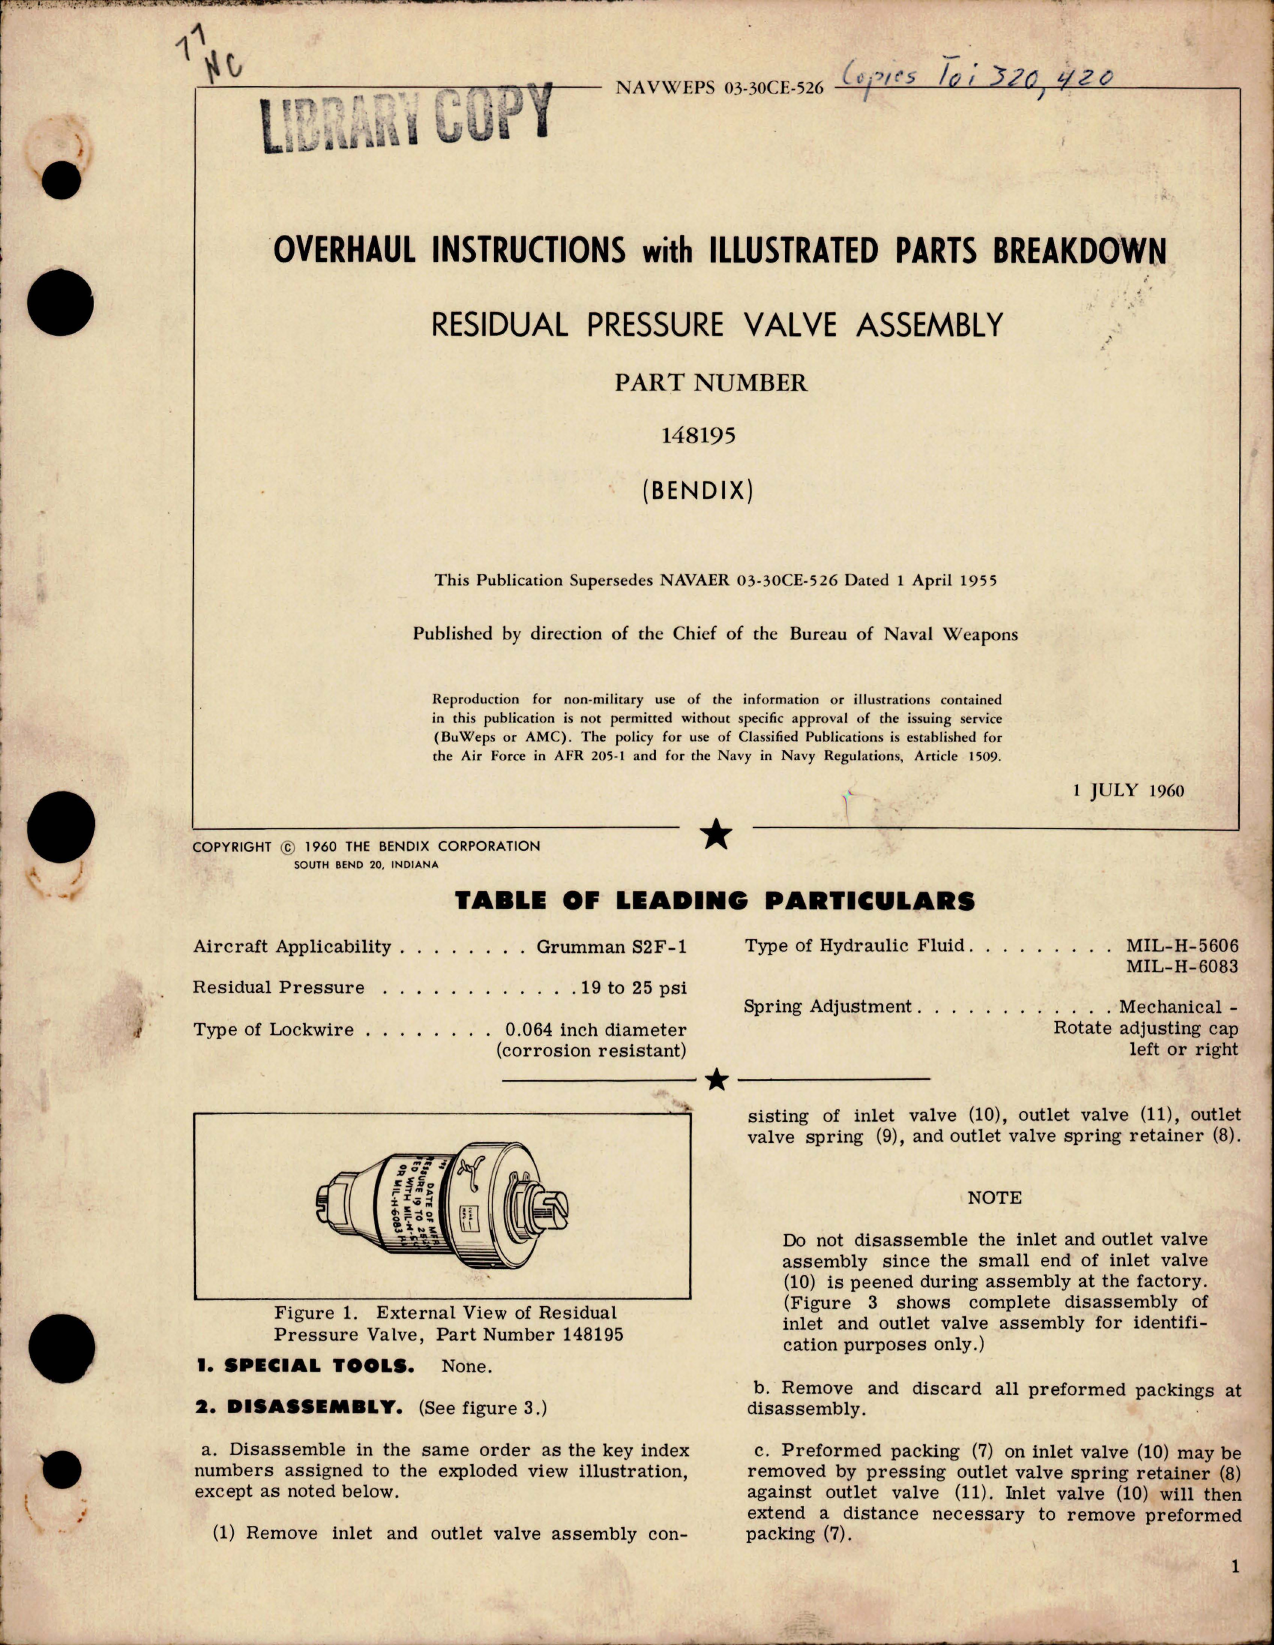 Sample page 1 from AirCorps Library document: Overhaul Instructions with Parts for Residual Pressure Valve Assembly - Part 148195 